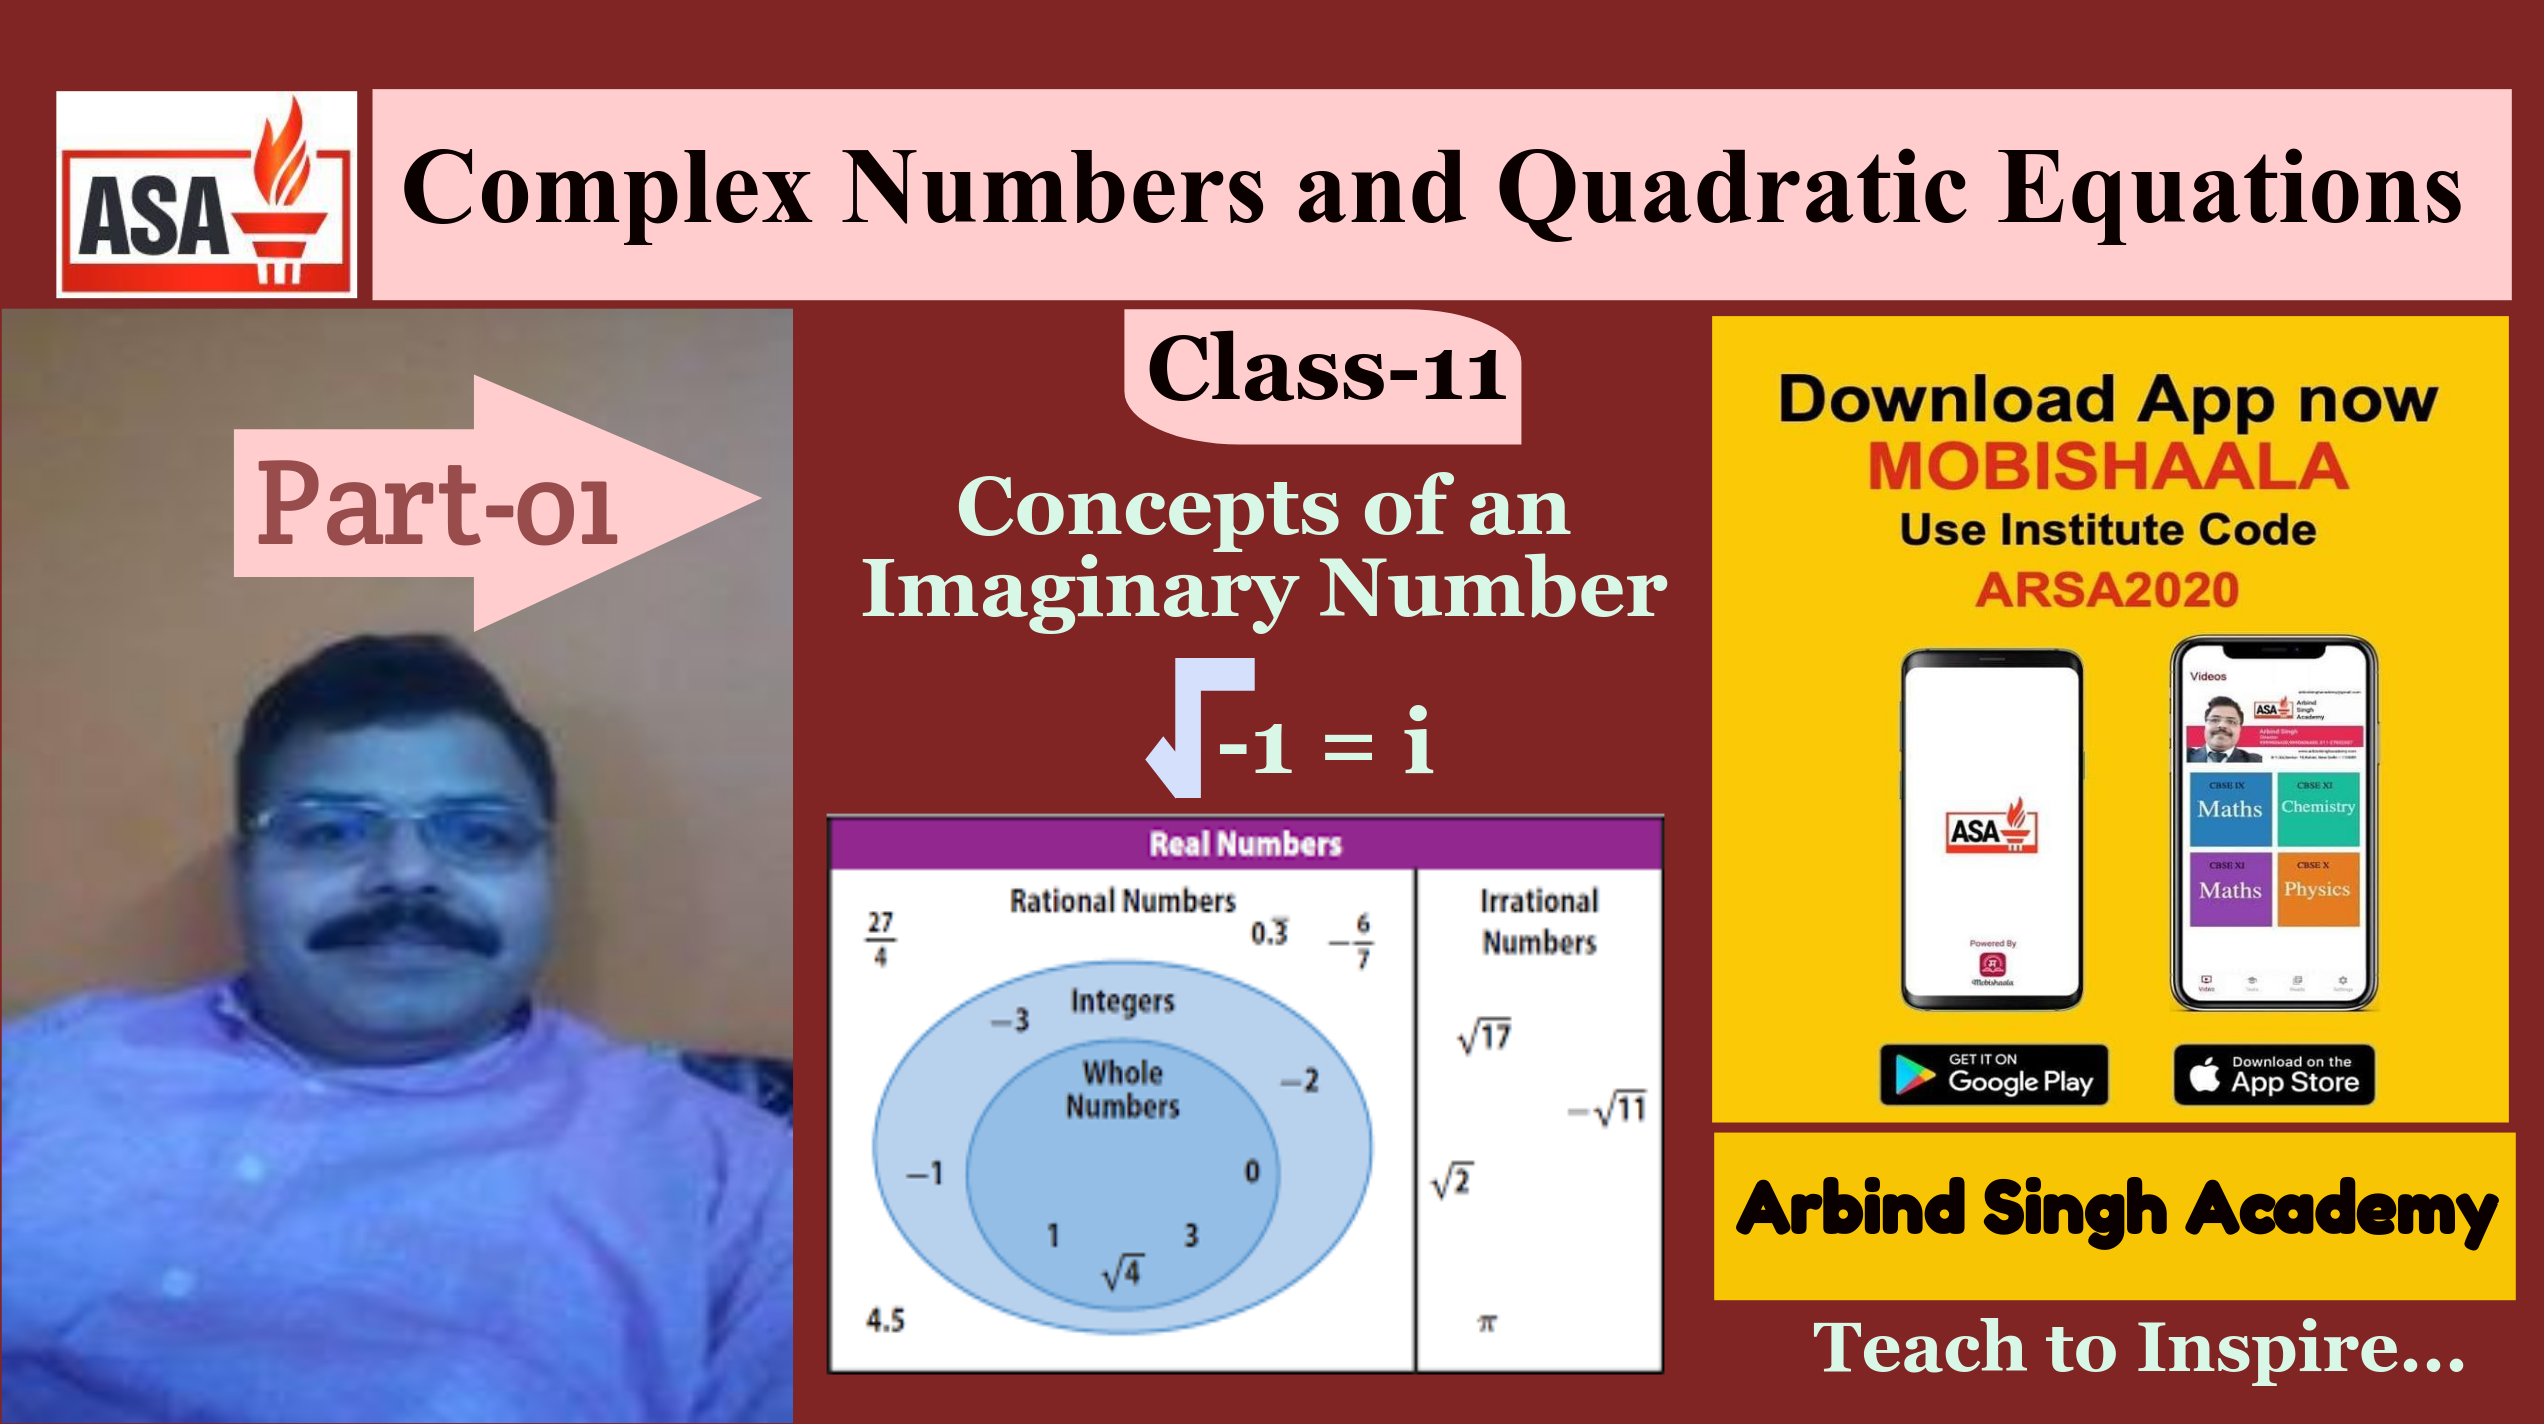 Complex Numbers and Qaudratic Equations for Class-11 : Part-01